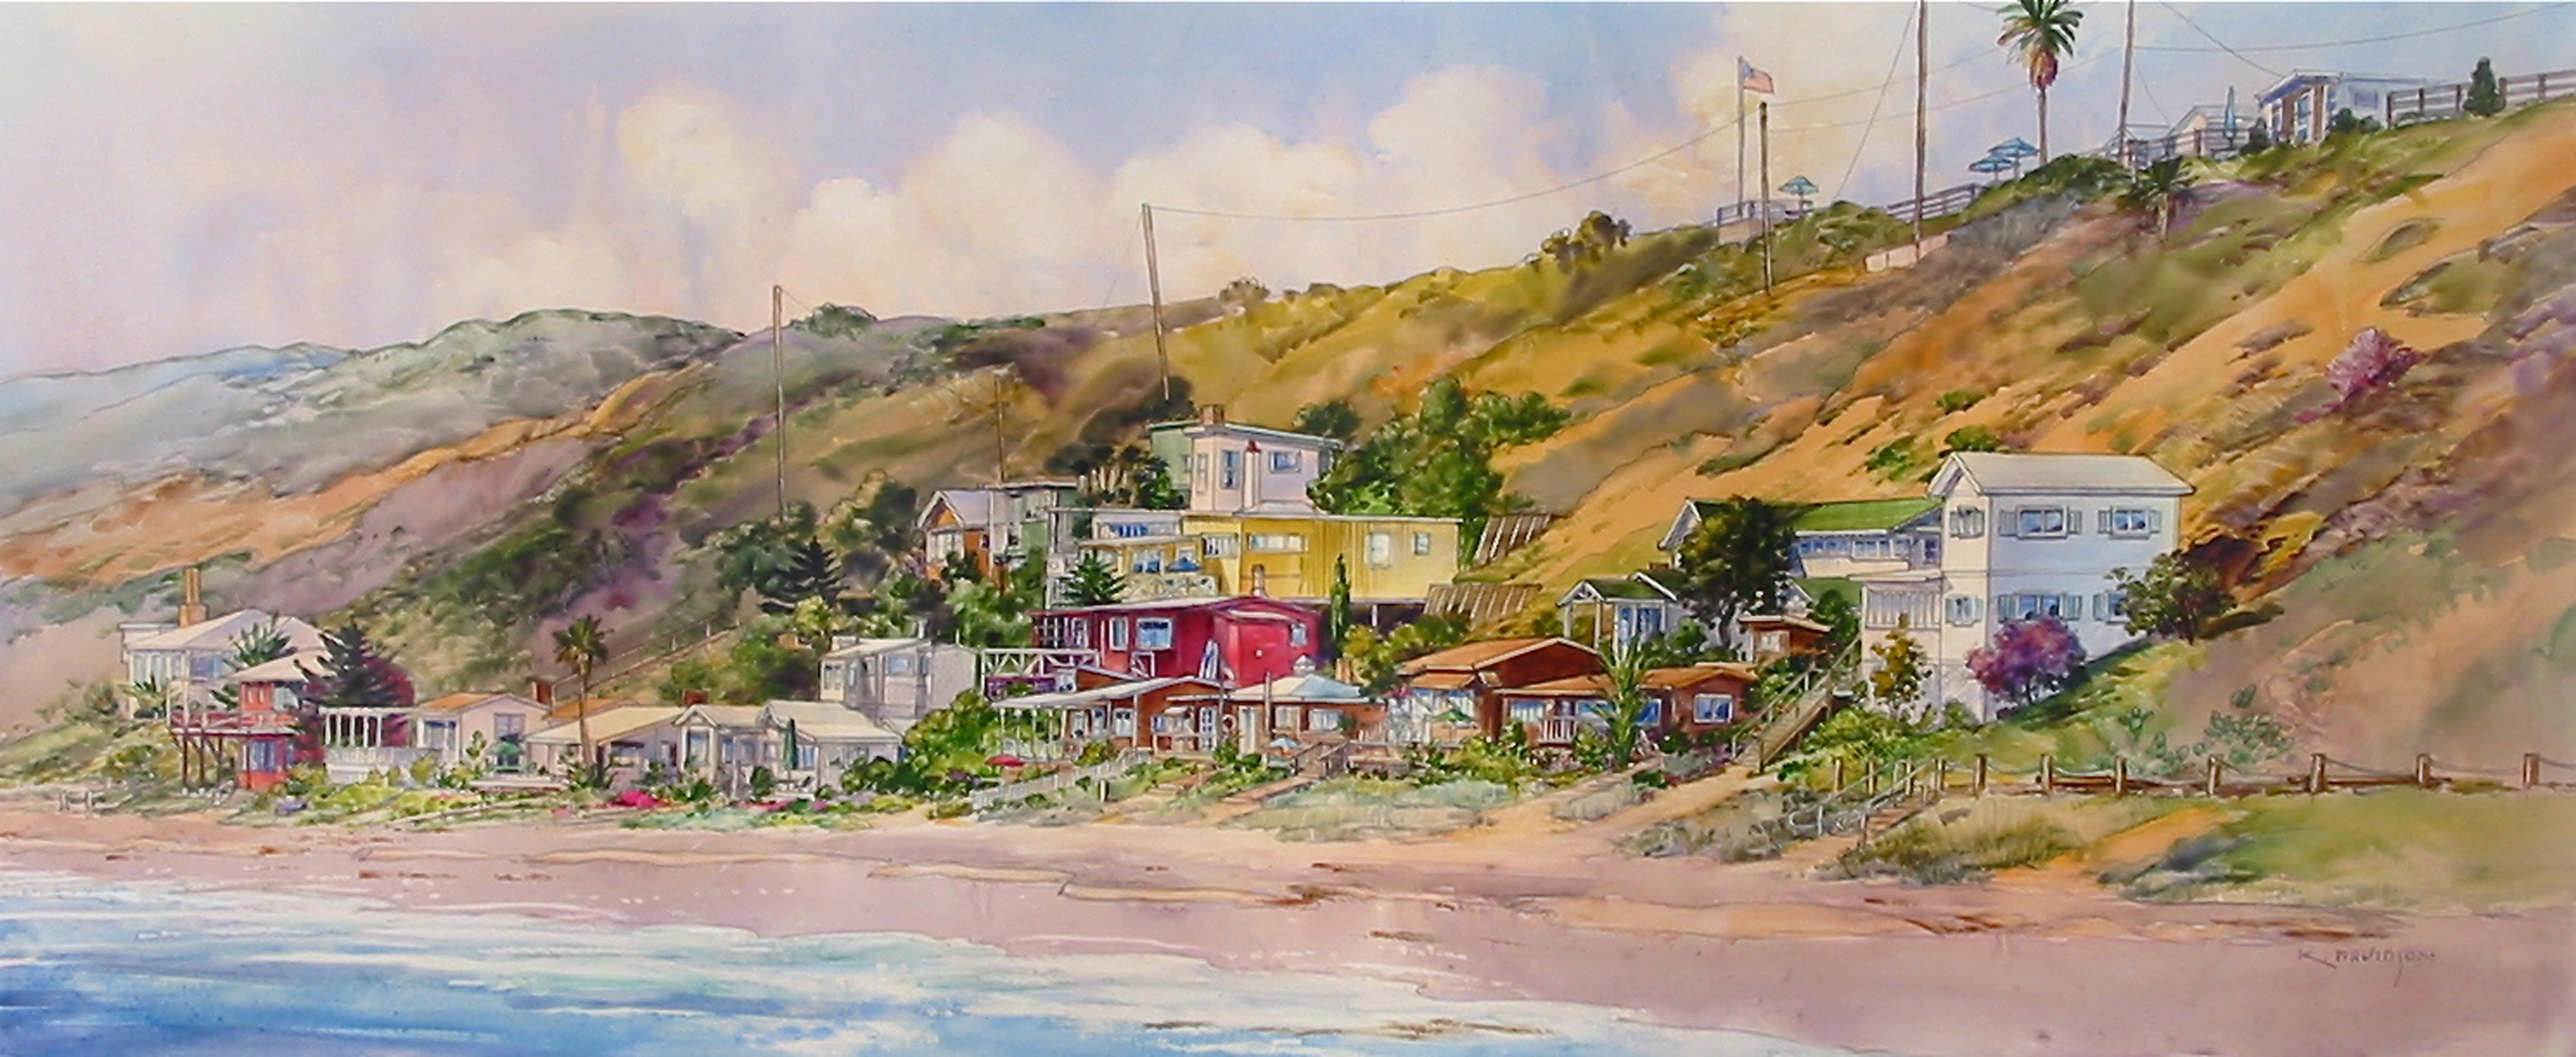 Save The North Beach Cottages Crystal Cove Conservancy